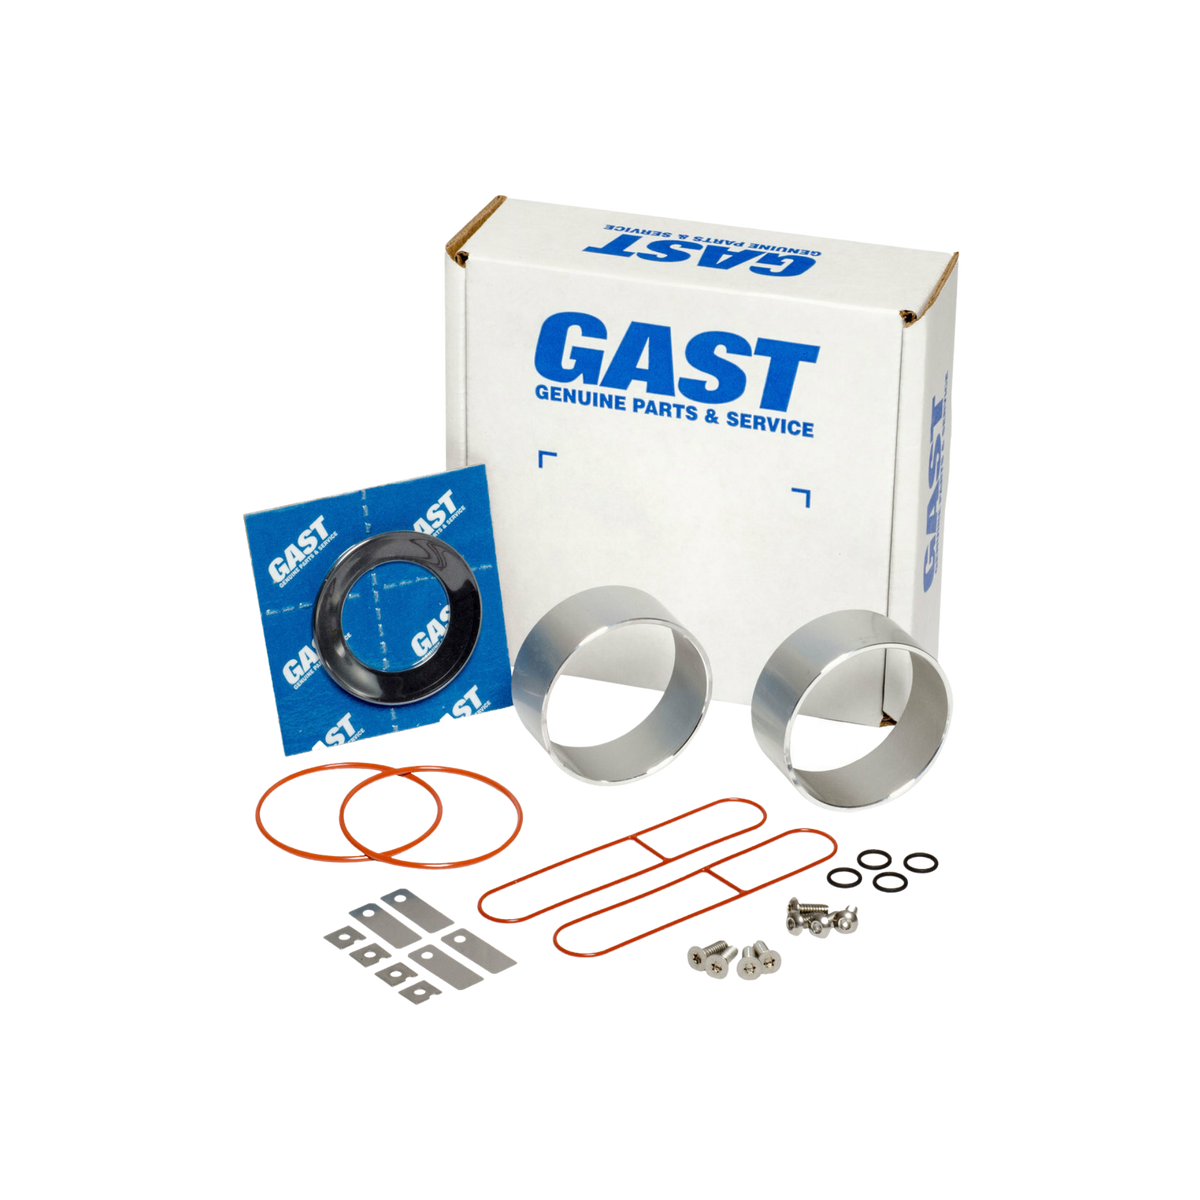 contects of a repair kit including gaskets, cylinders, o-rings, screws, and a white Gast box